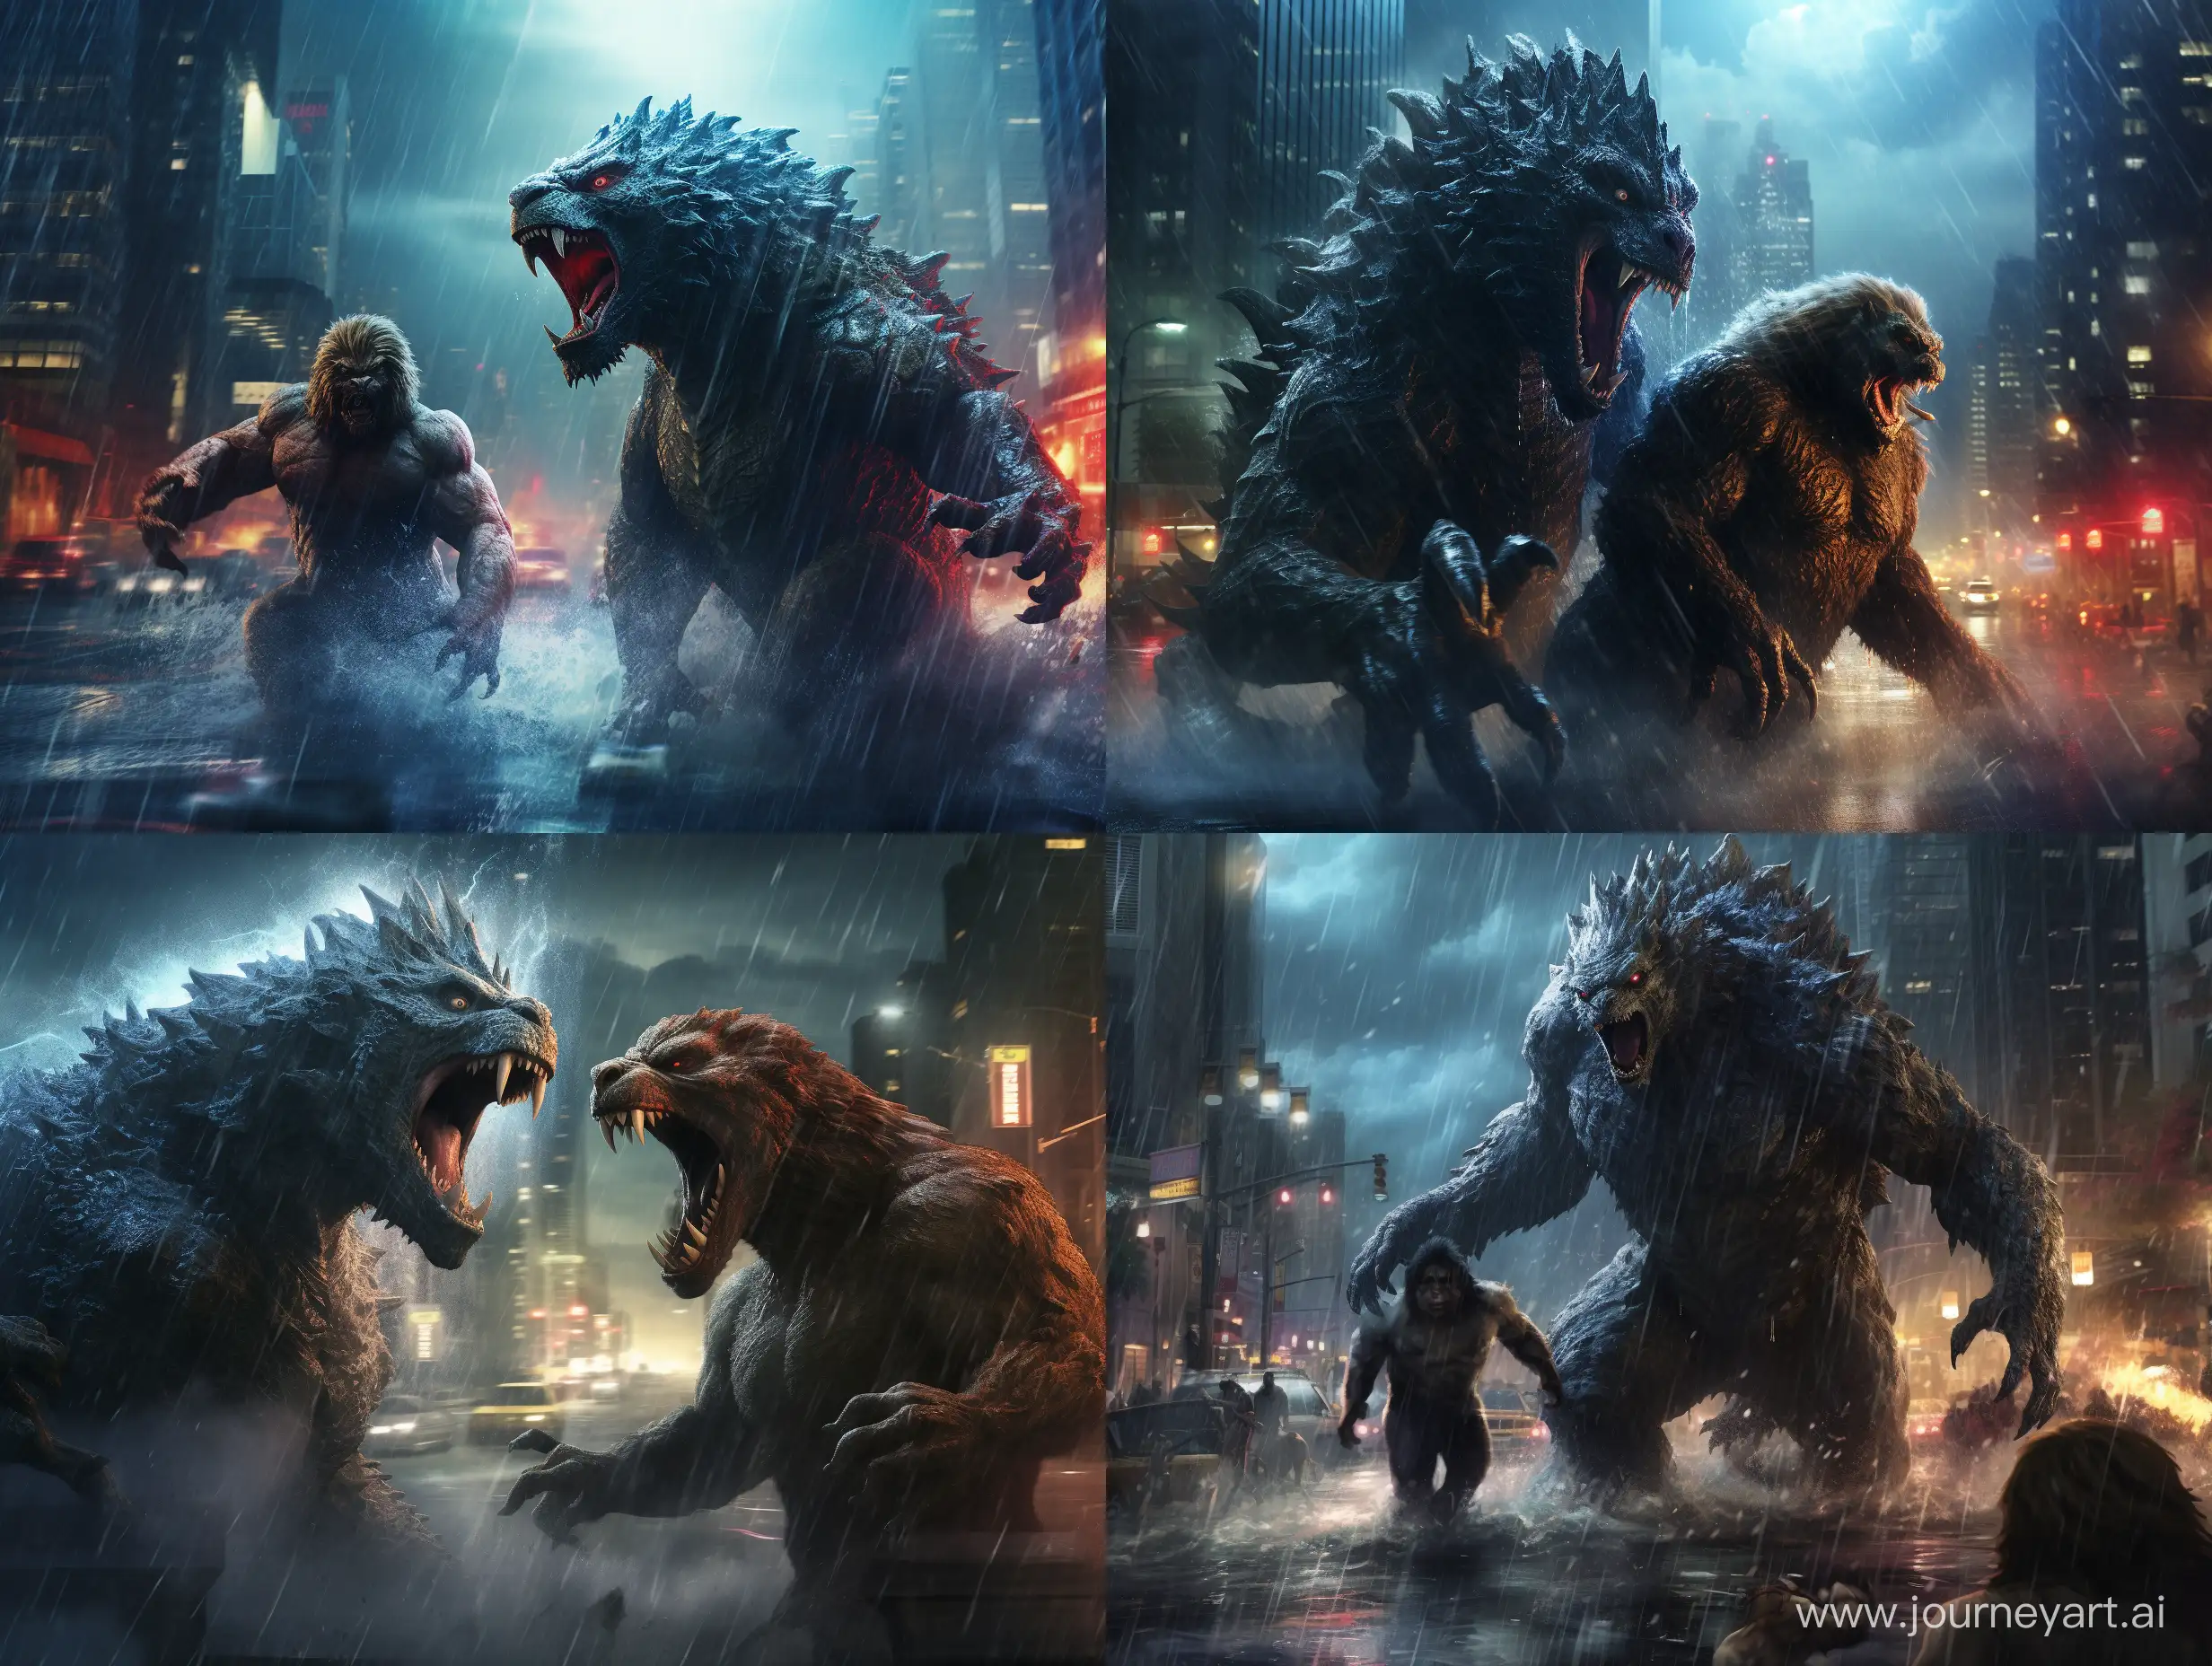 Godzilla and King Kong fighting in the center of the city, it's night and raining. 